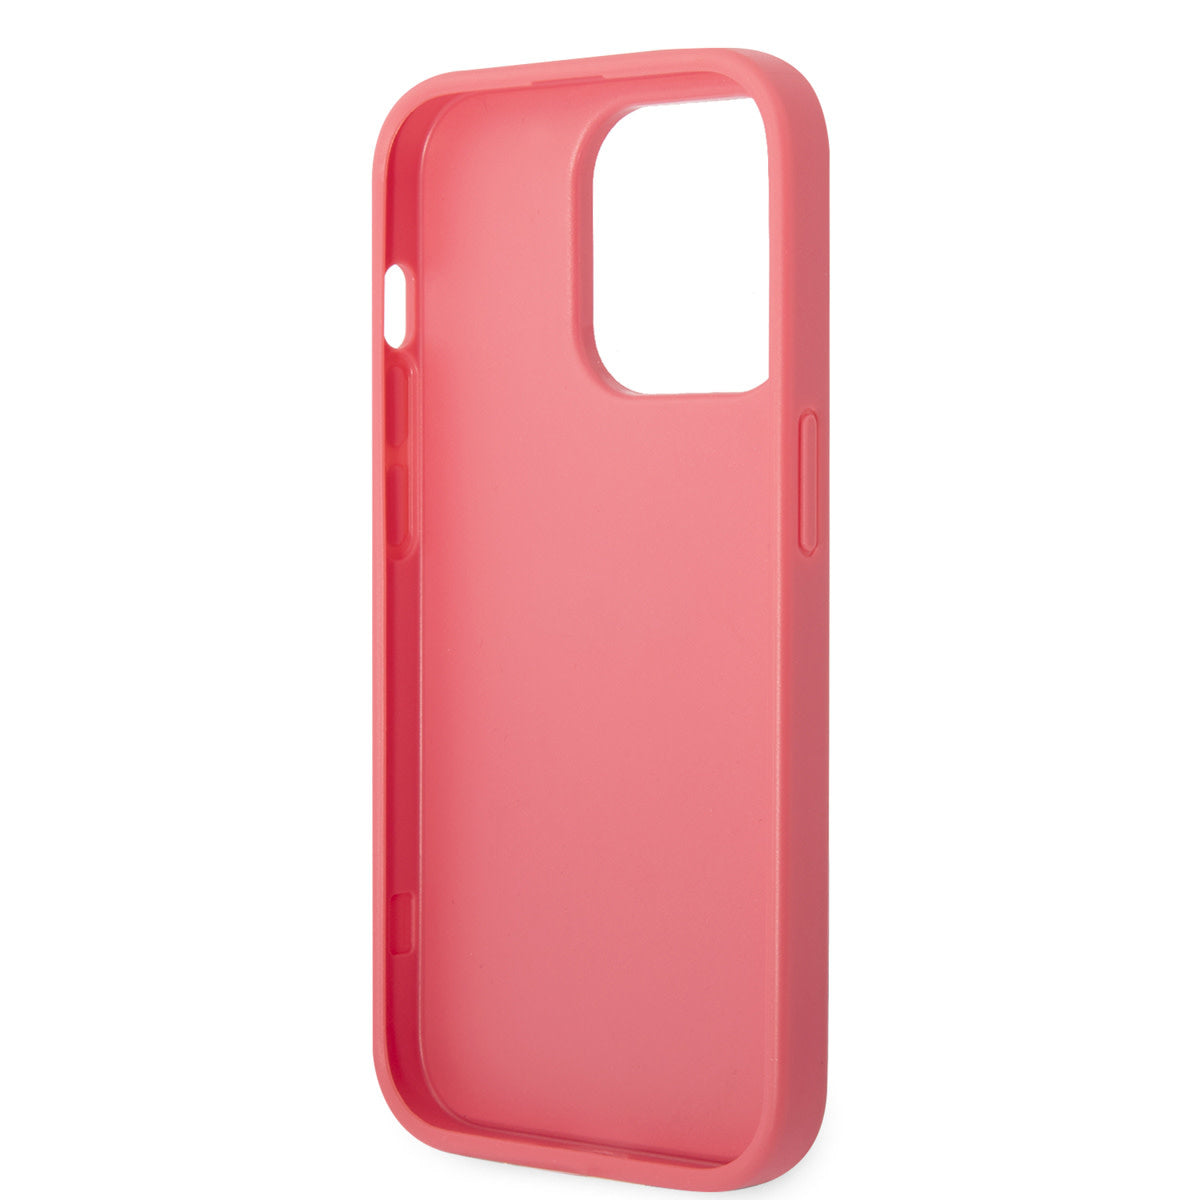 Guess iPhone 14 Pro Max Backcover - Saffiano - Roze